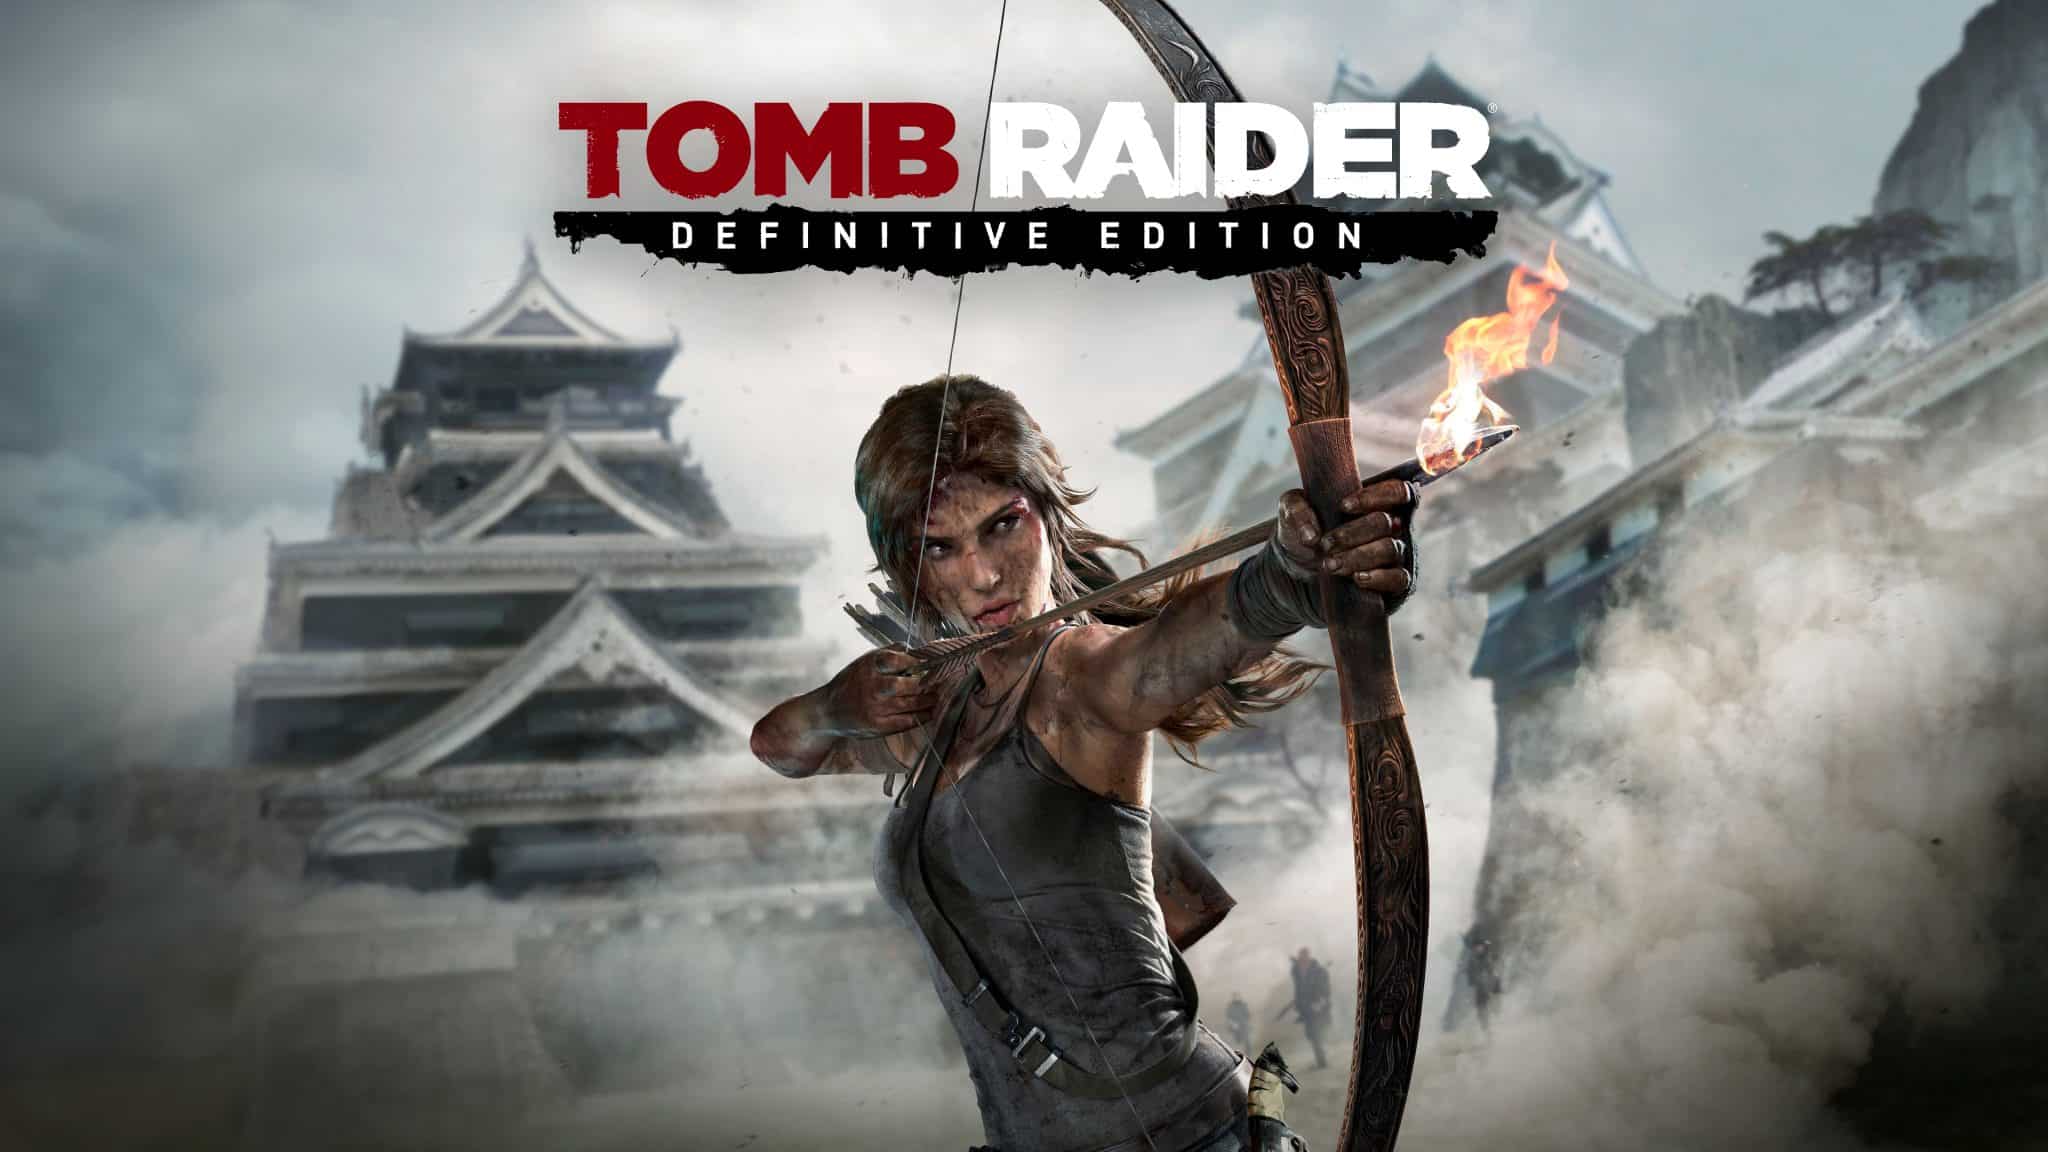 shadow-of-the-tomb-raider-definitive-edition-definitive-edition-pc-mac-game-steam-cover